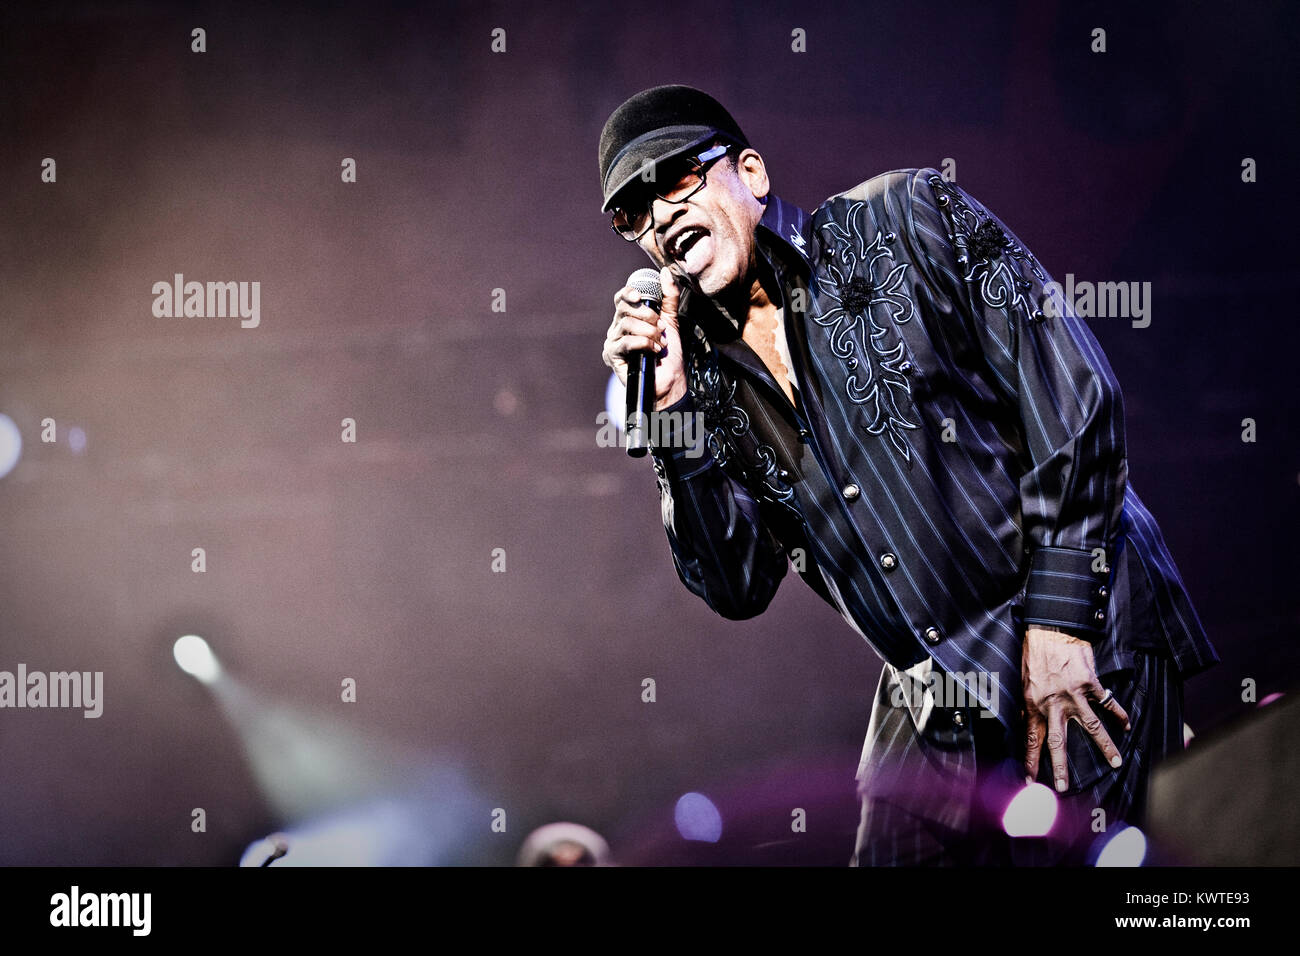 The virtual English band Gorillaz, led by frontman Damon Albarn, performs a live concert at the Orange Stage at Roskilde Festival 2010. Here the American soul singer Bobby Womack has joined the band on stage. Denmark, 01/07 2010. Stock Photo